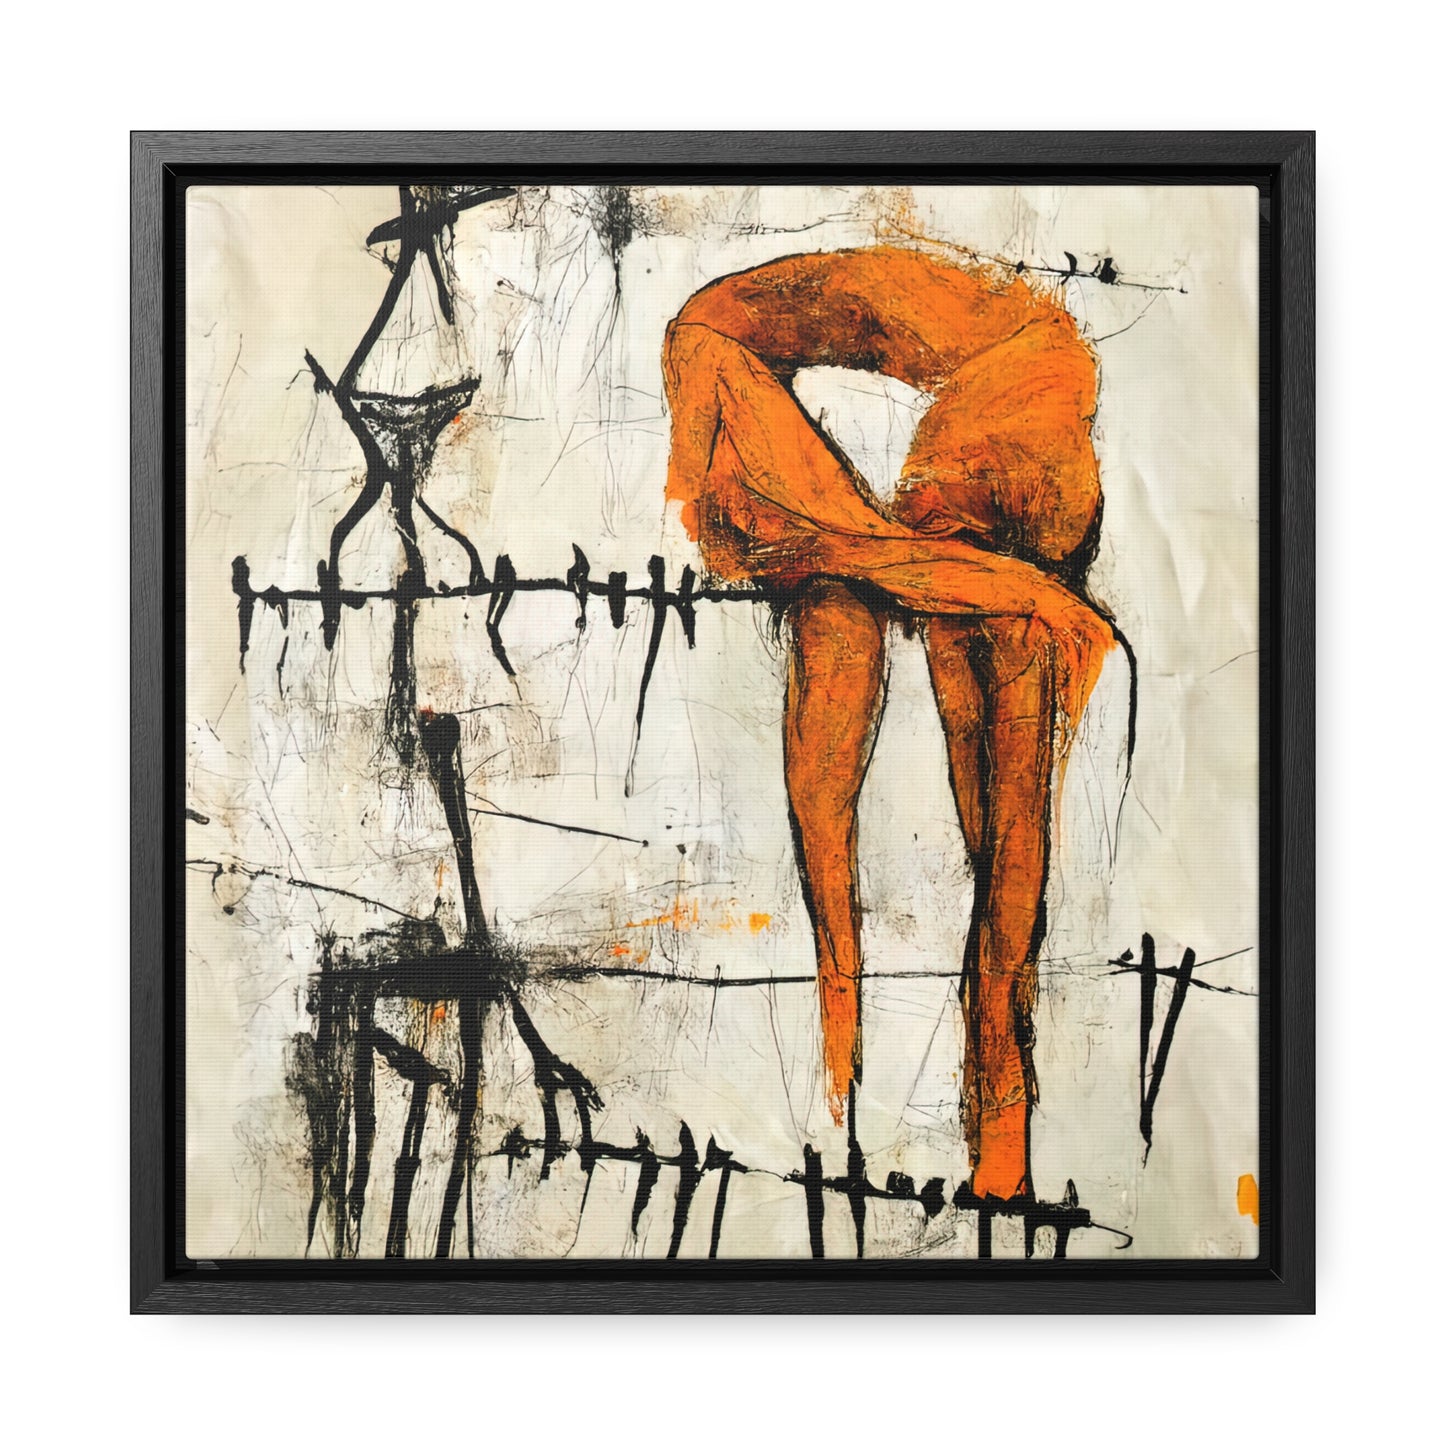 Feet and Drama 18, Valentinii, Gallery Canvas Wraps, Square Frame